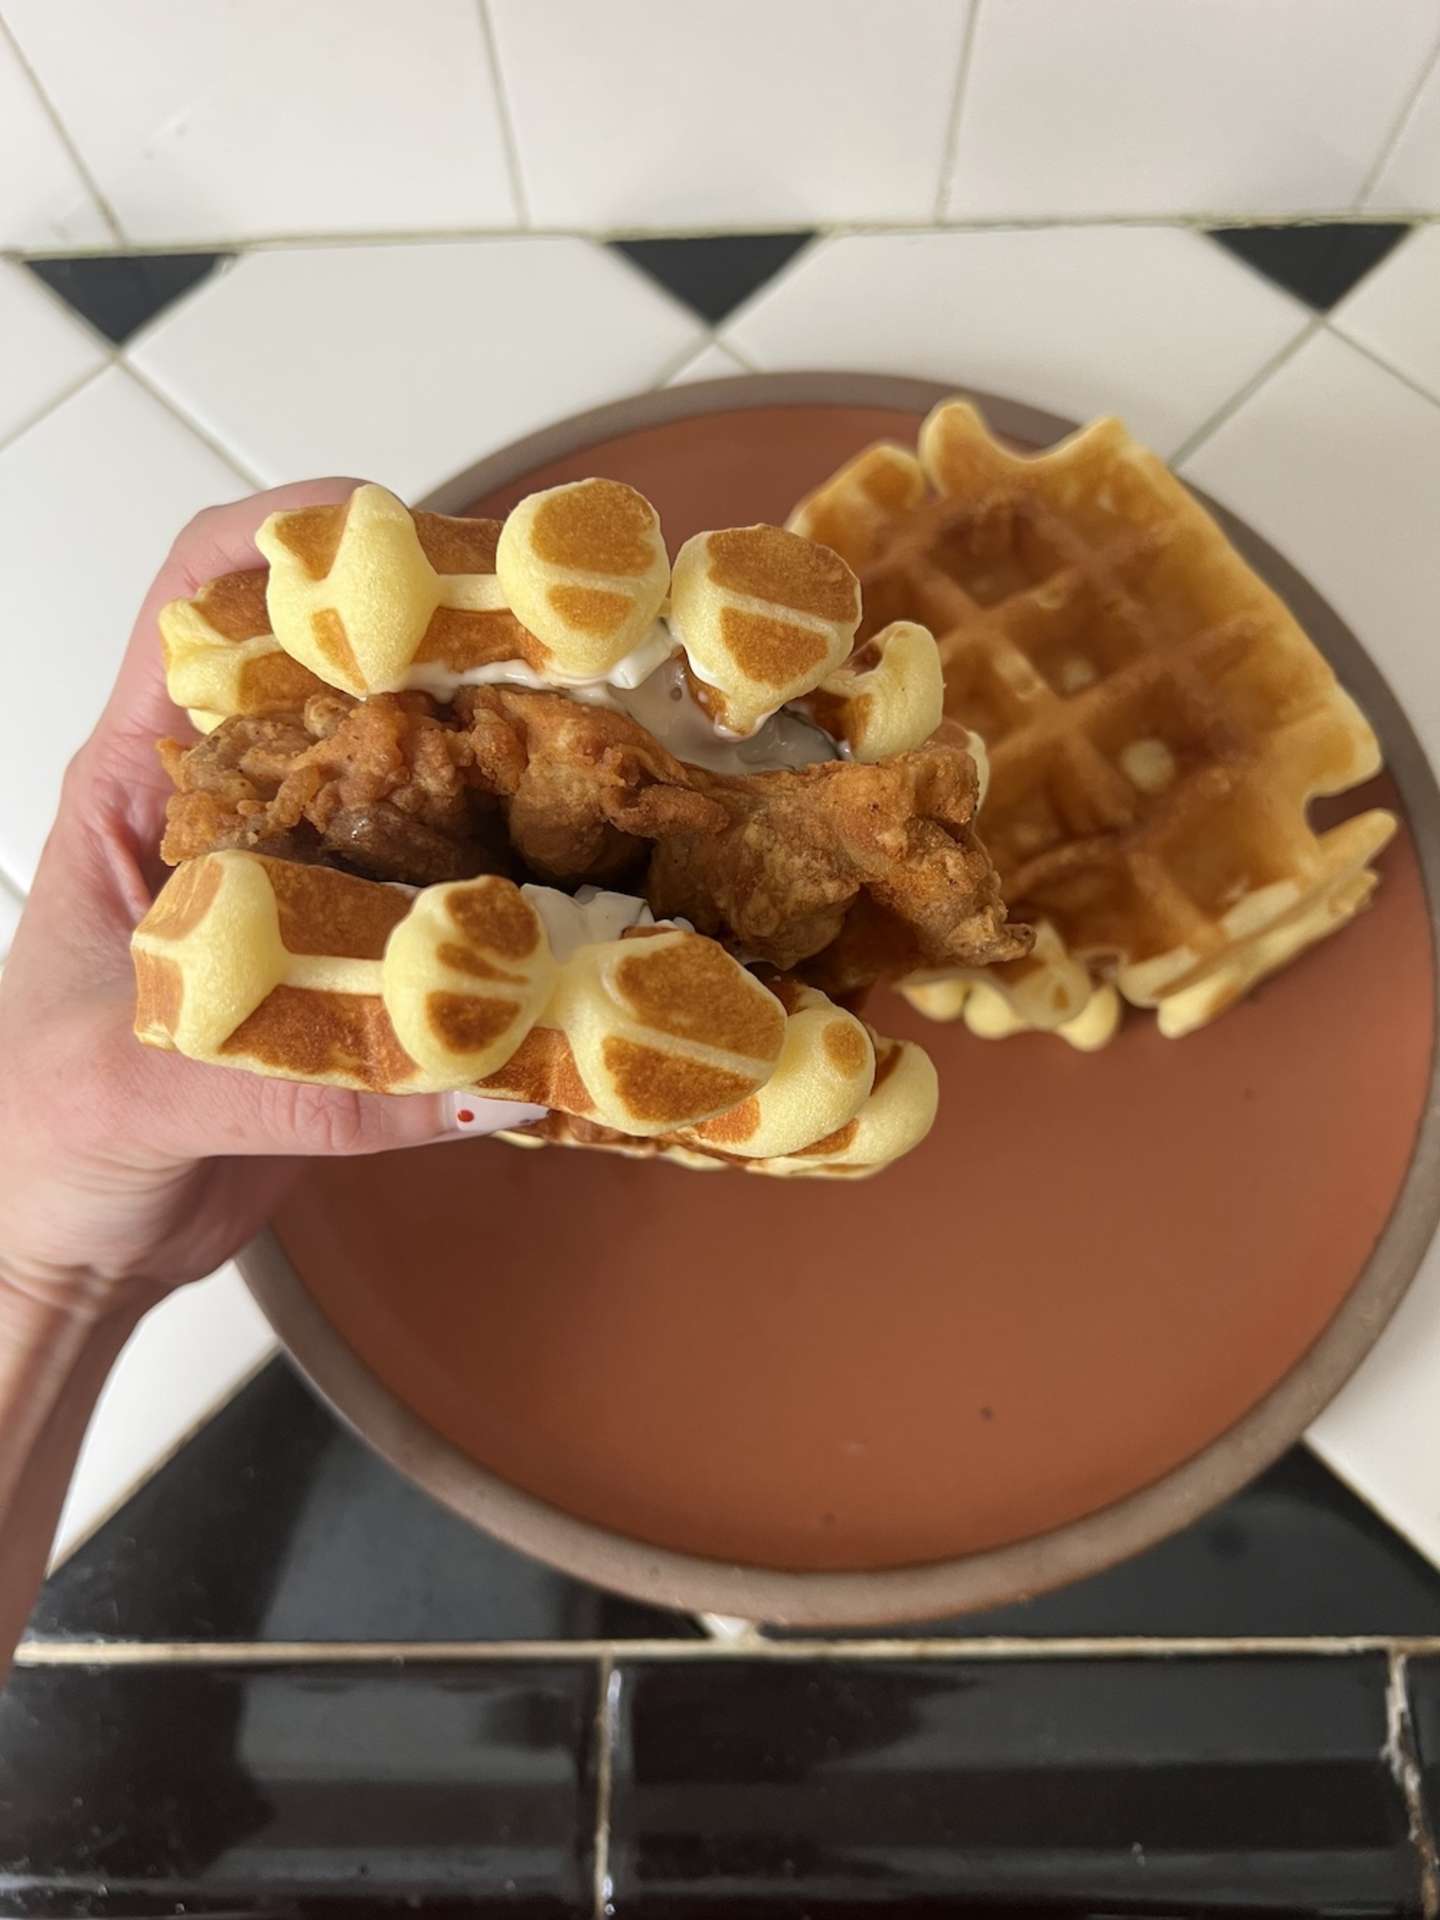 Chicken and Waffles Shoppable Image